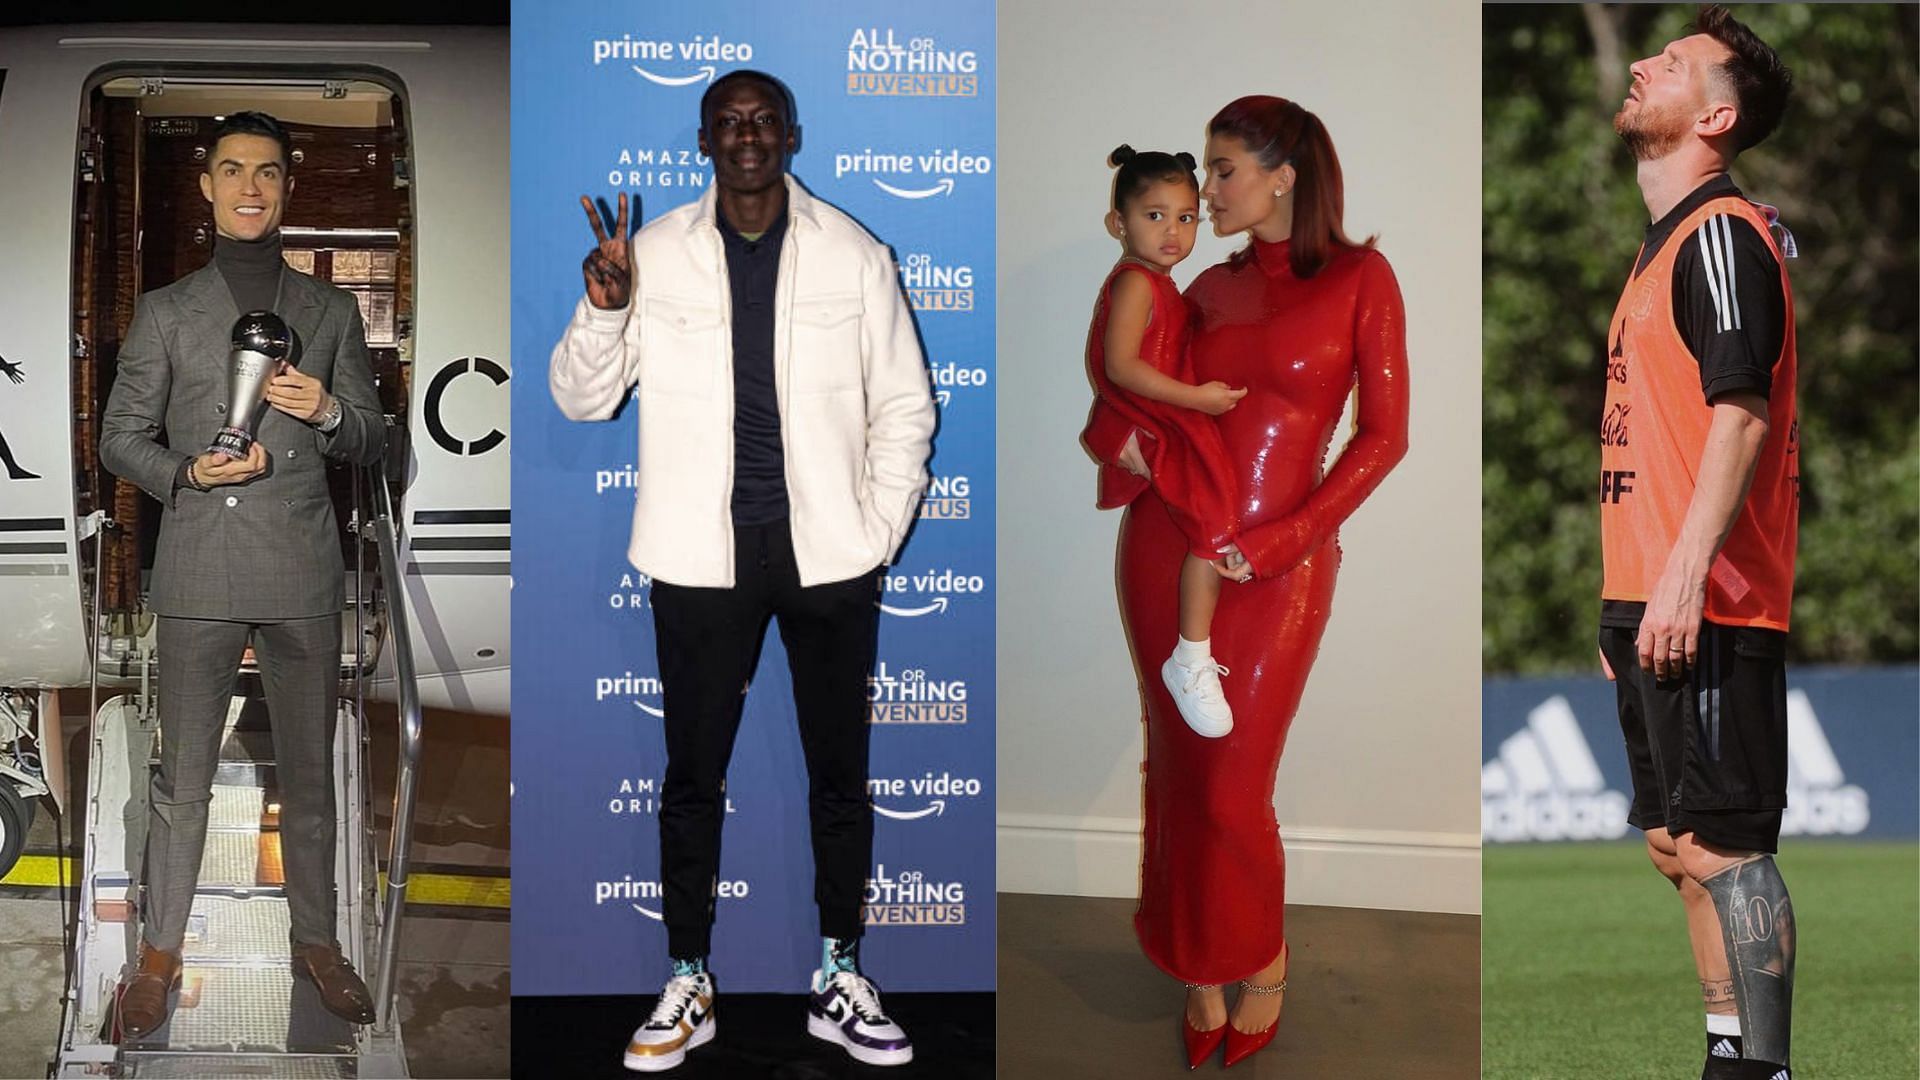 Most-liked viral reels on Instagram by these celebrities (Image via @cristiano, @kyliejenner, @leomessi/Instagram, Getty Images)